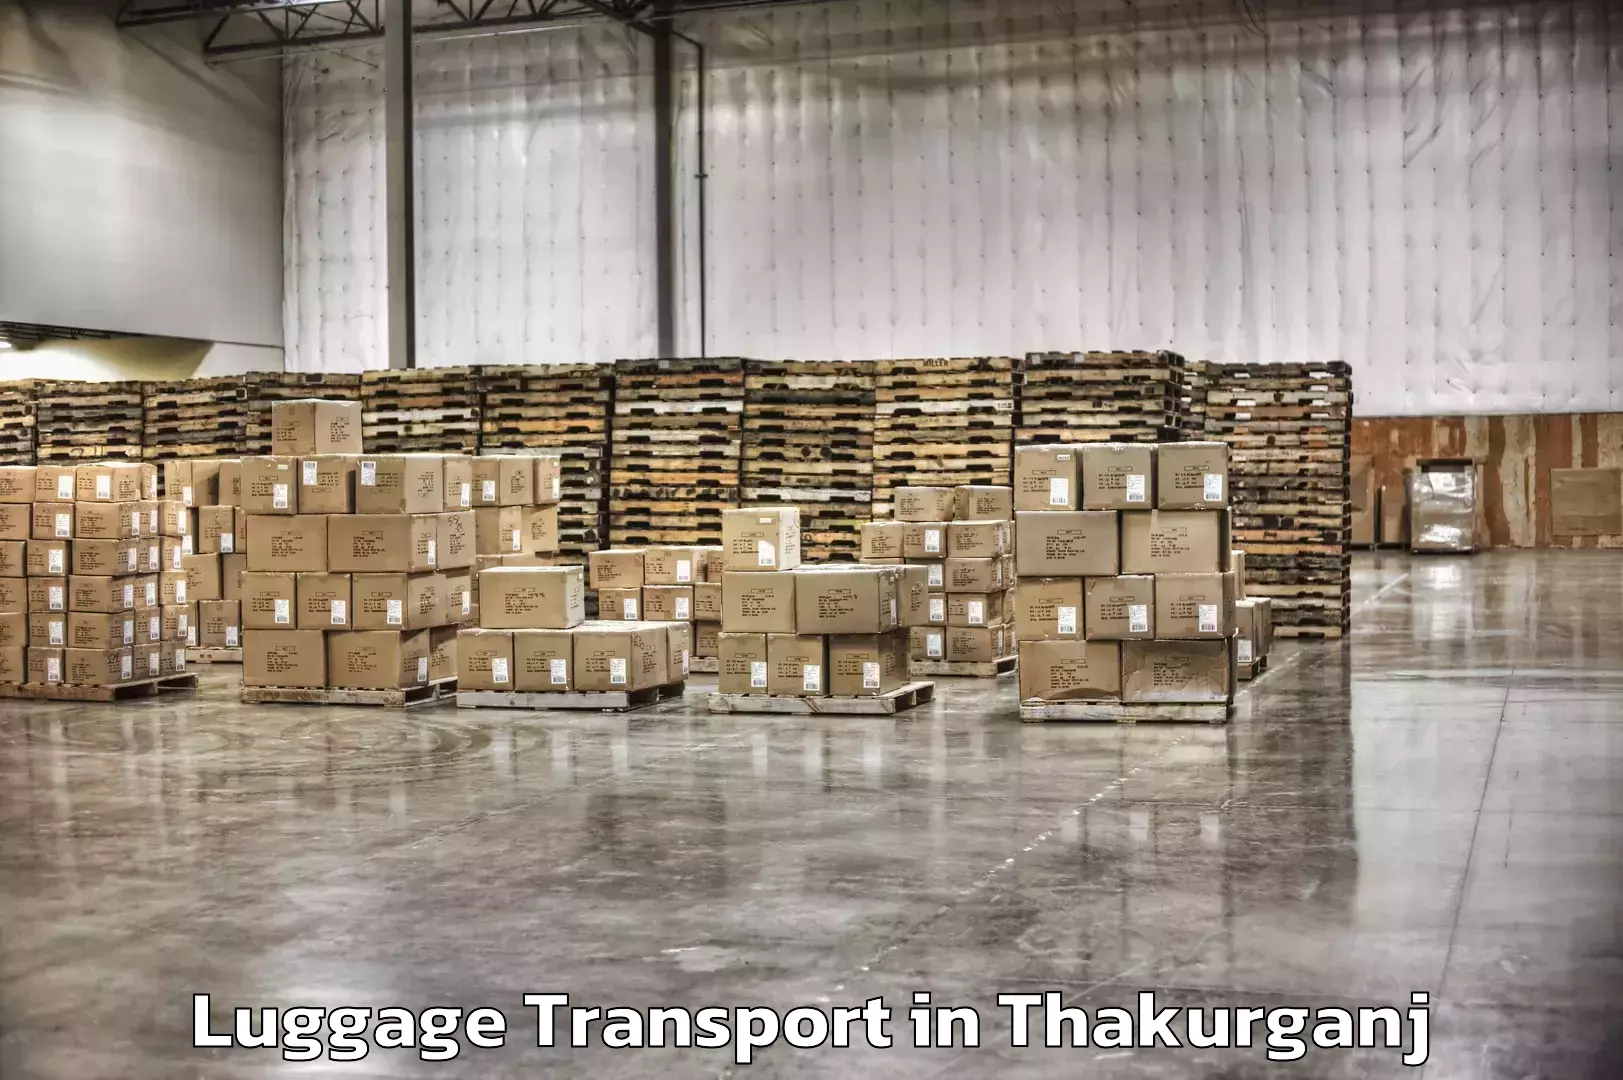 Express luggage delivery in Thakurganj